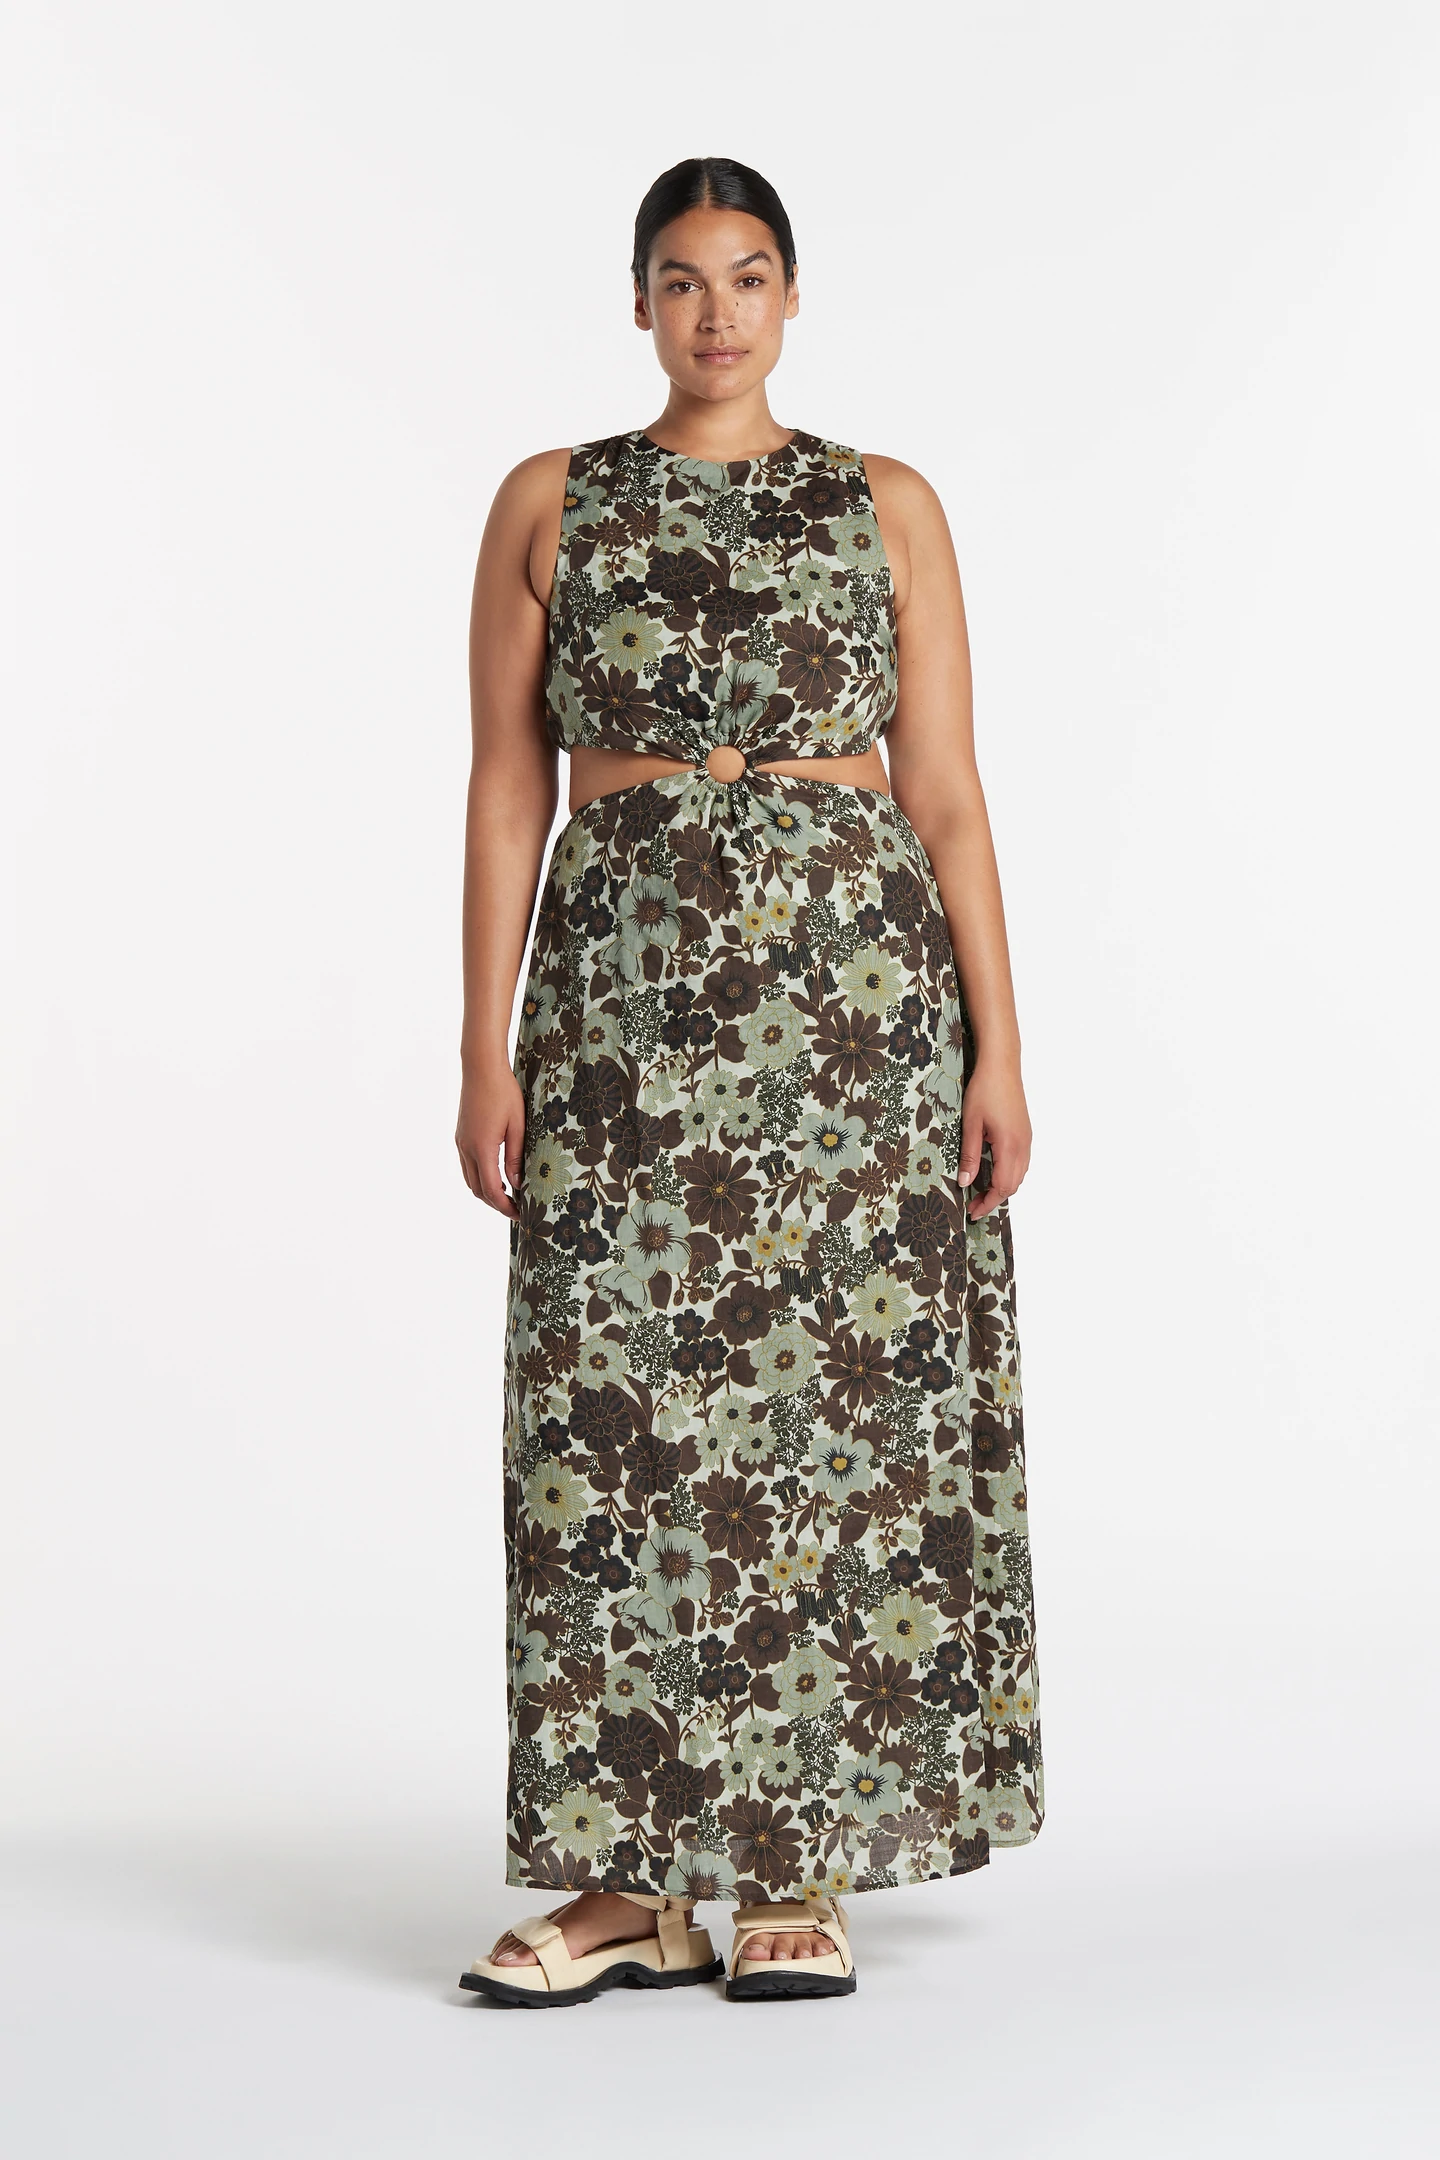 SIR. - CONSTANTINE CUT OUT MIDI DRESS - FLORAL - PRELOVED